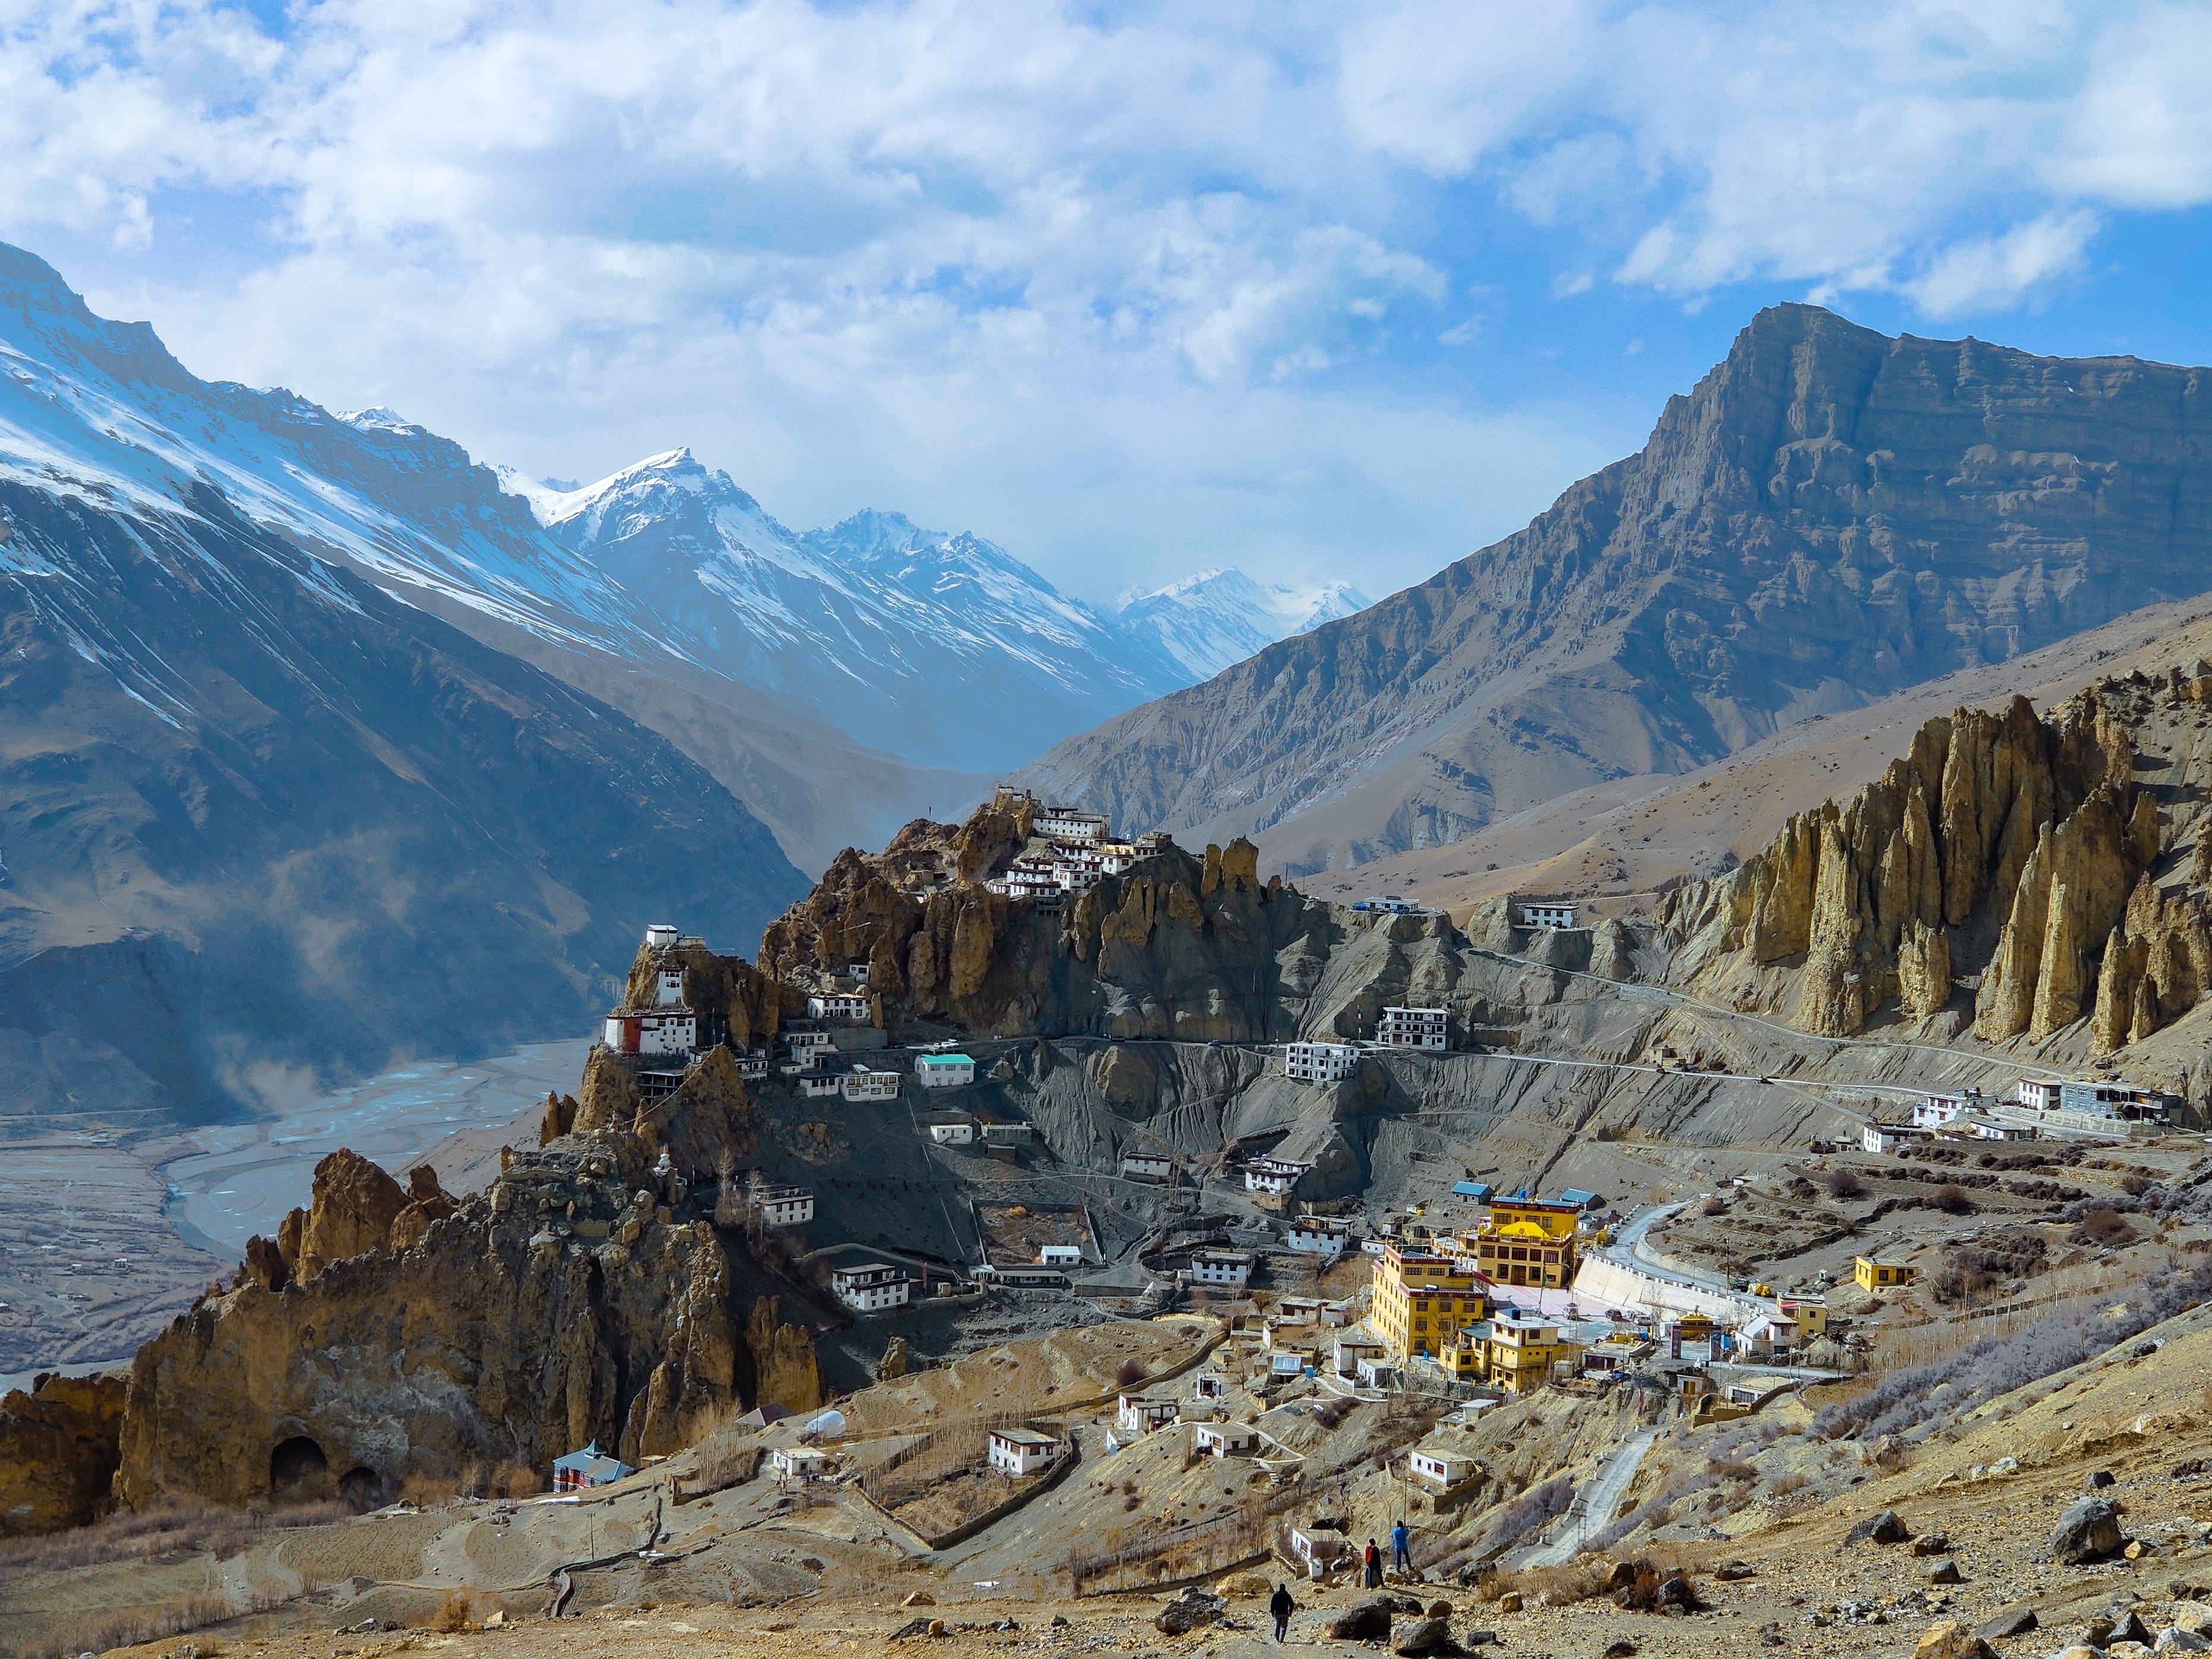 Lhalung Monastery in Spiti Valley